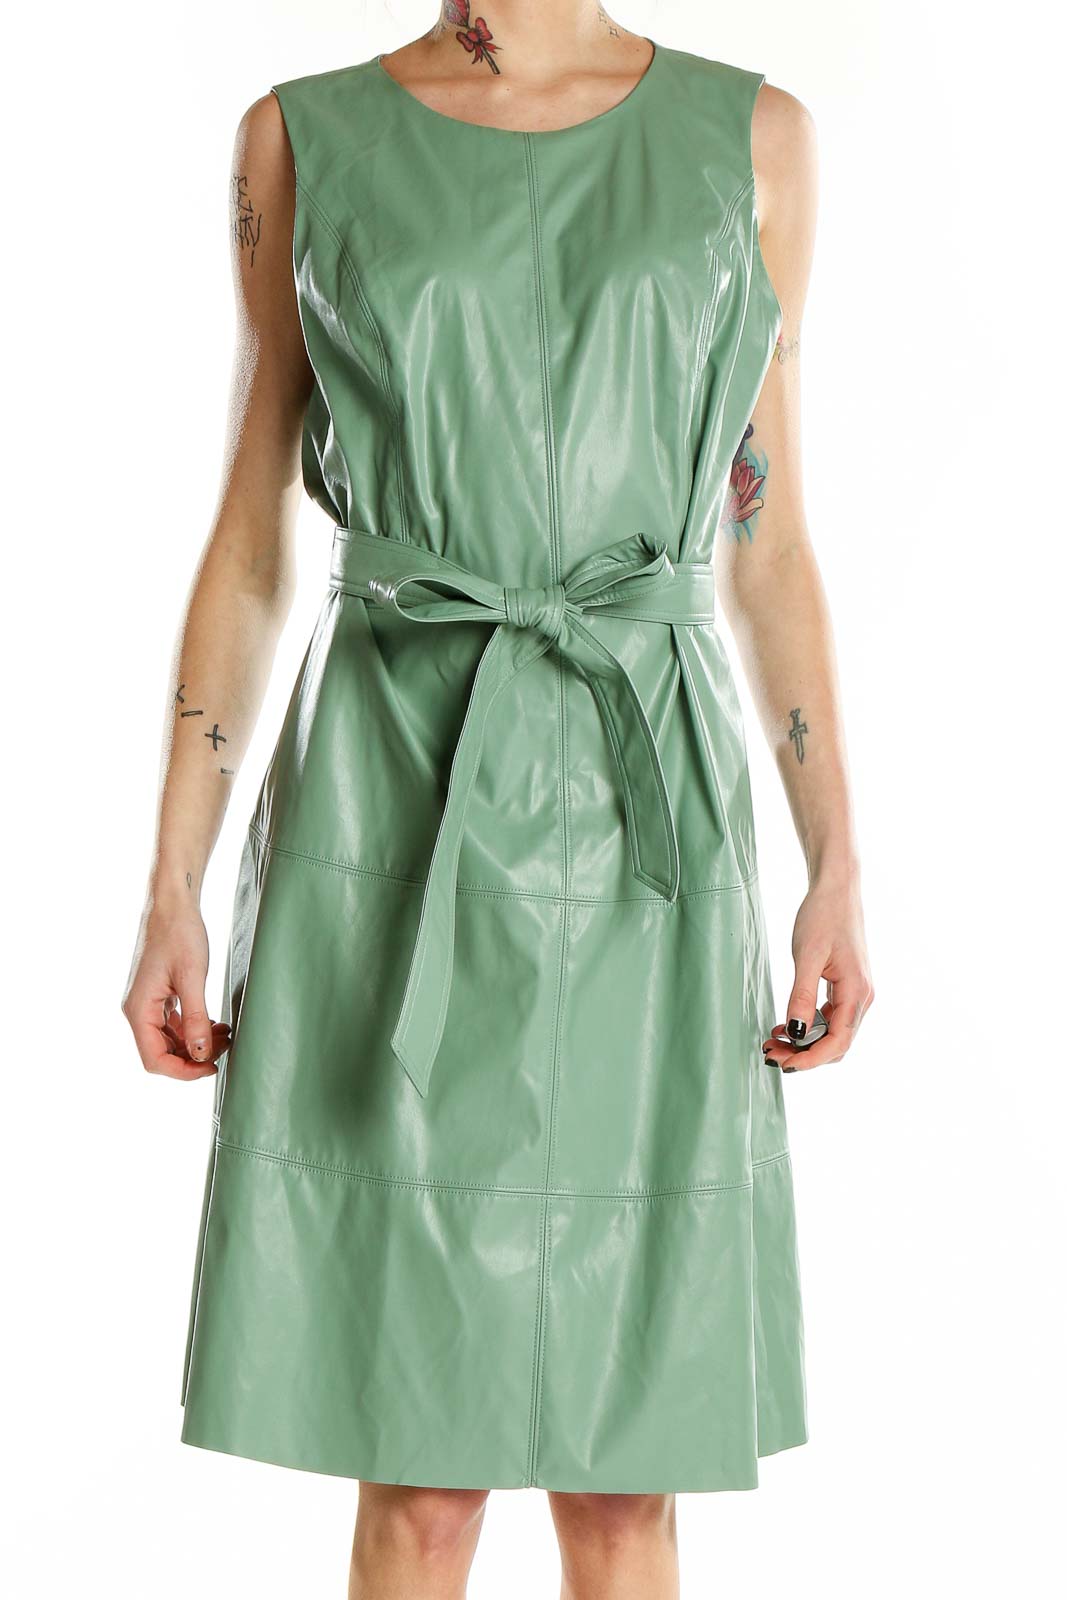 Green Faux Leather Dress Front